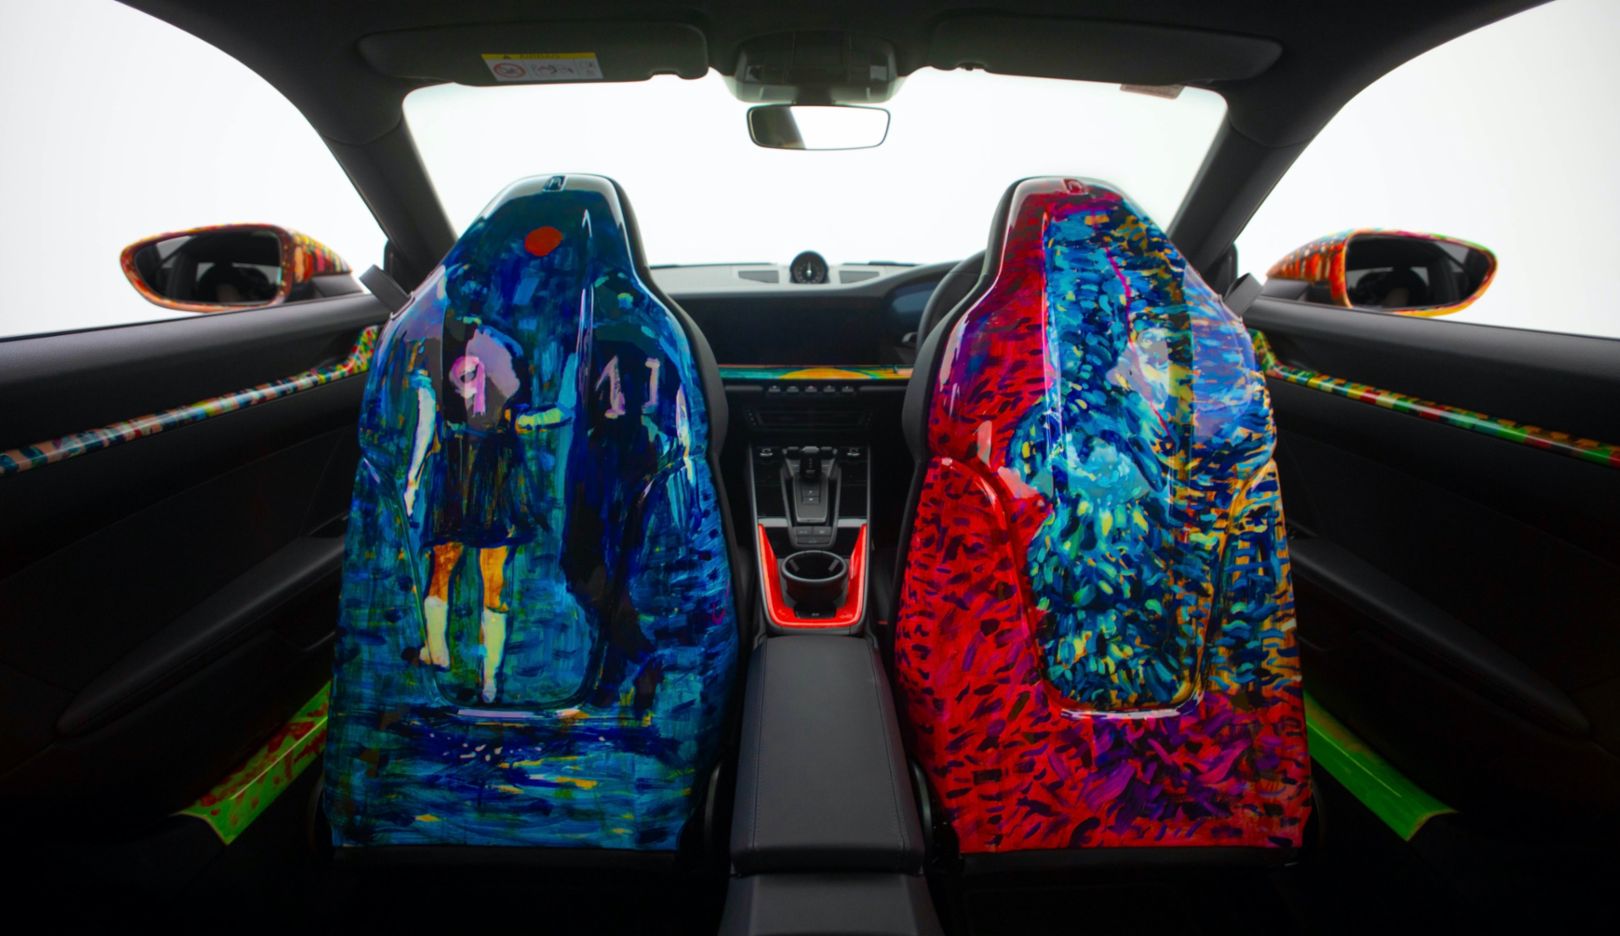 Rare viewing: The only way to see Nelson Makamo's art on the backs of the front seats is to be a passenger in his Porsche 911.